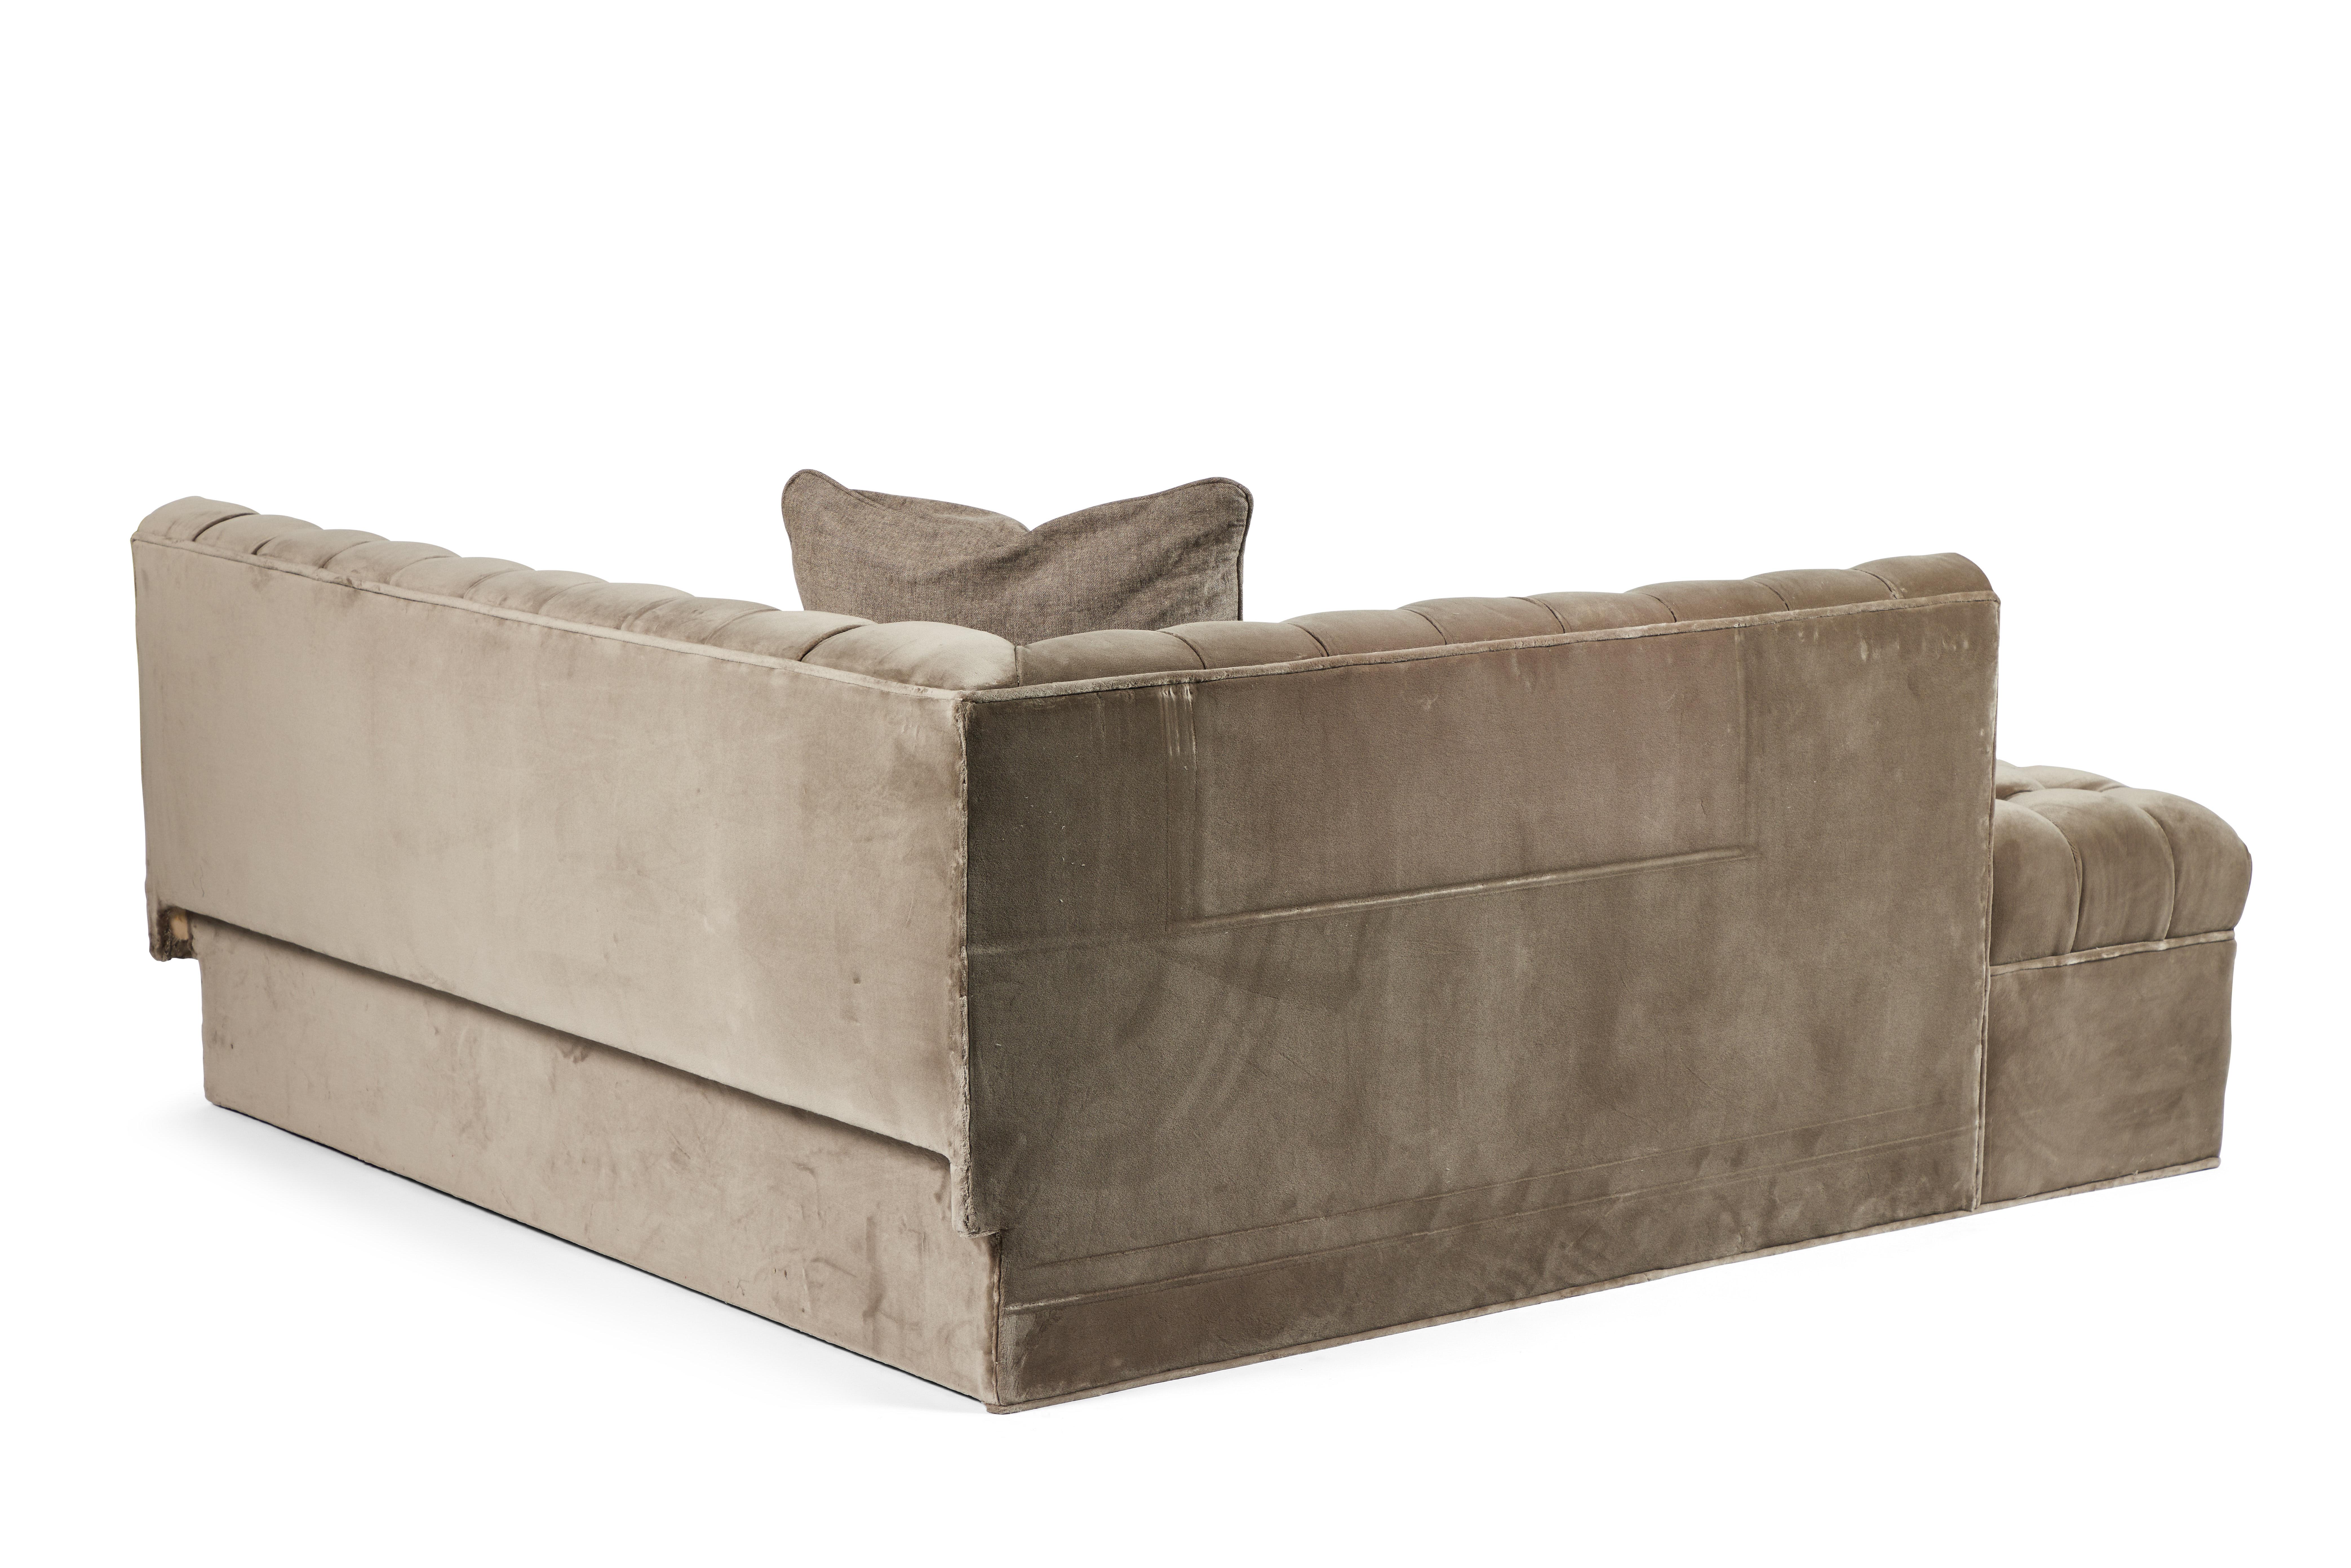 American Contemporary Grey Suede Tufted L-Shaped Corner Sofas, Set of 2 For Sale